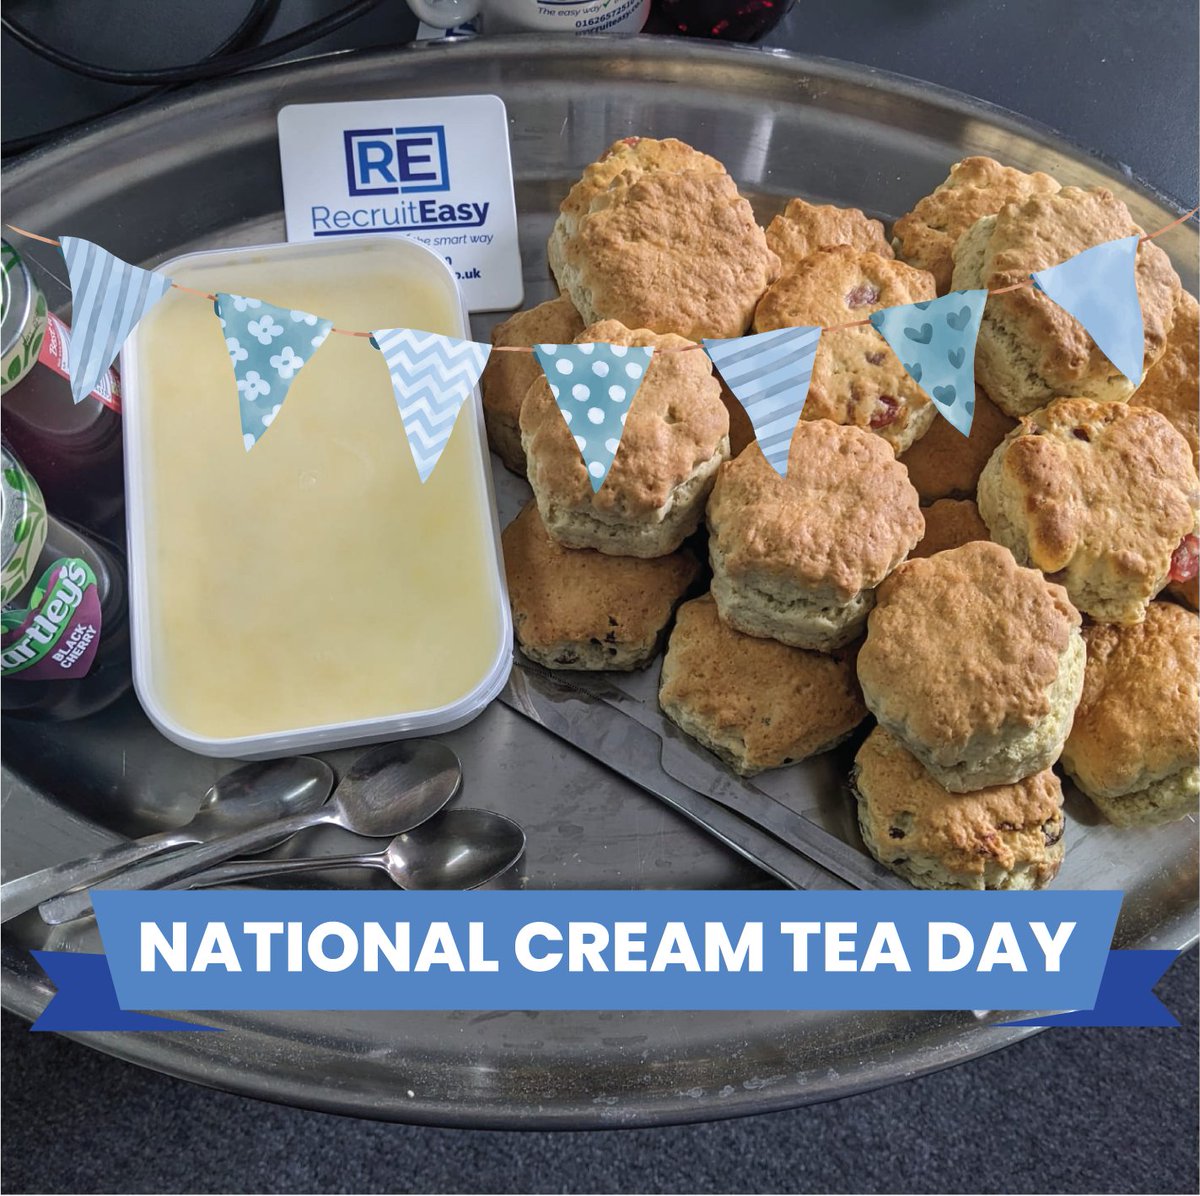 Happy National Cream Tea Day. Having a spot of afternoon tea in the office. #nationalcreamteaday #recruiteasy #scone #jam #clottedcream